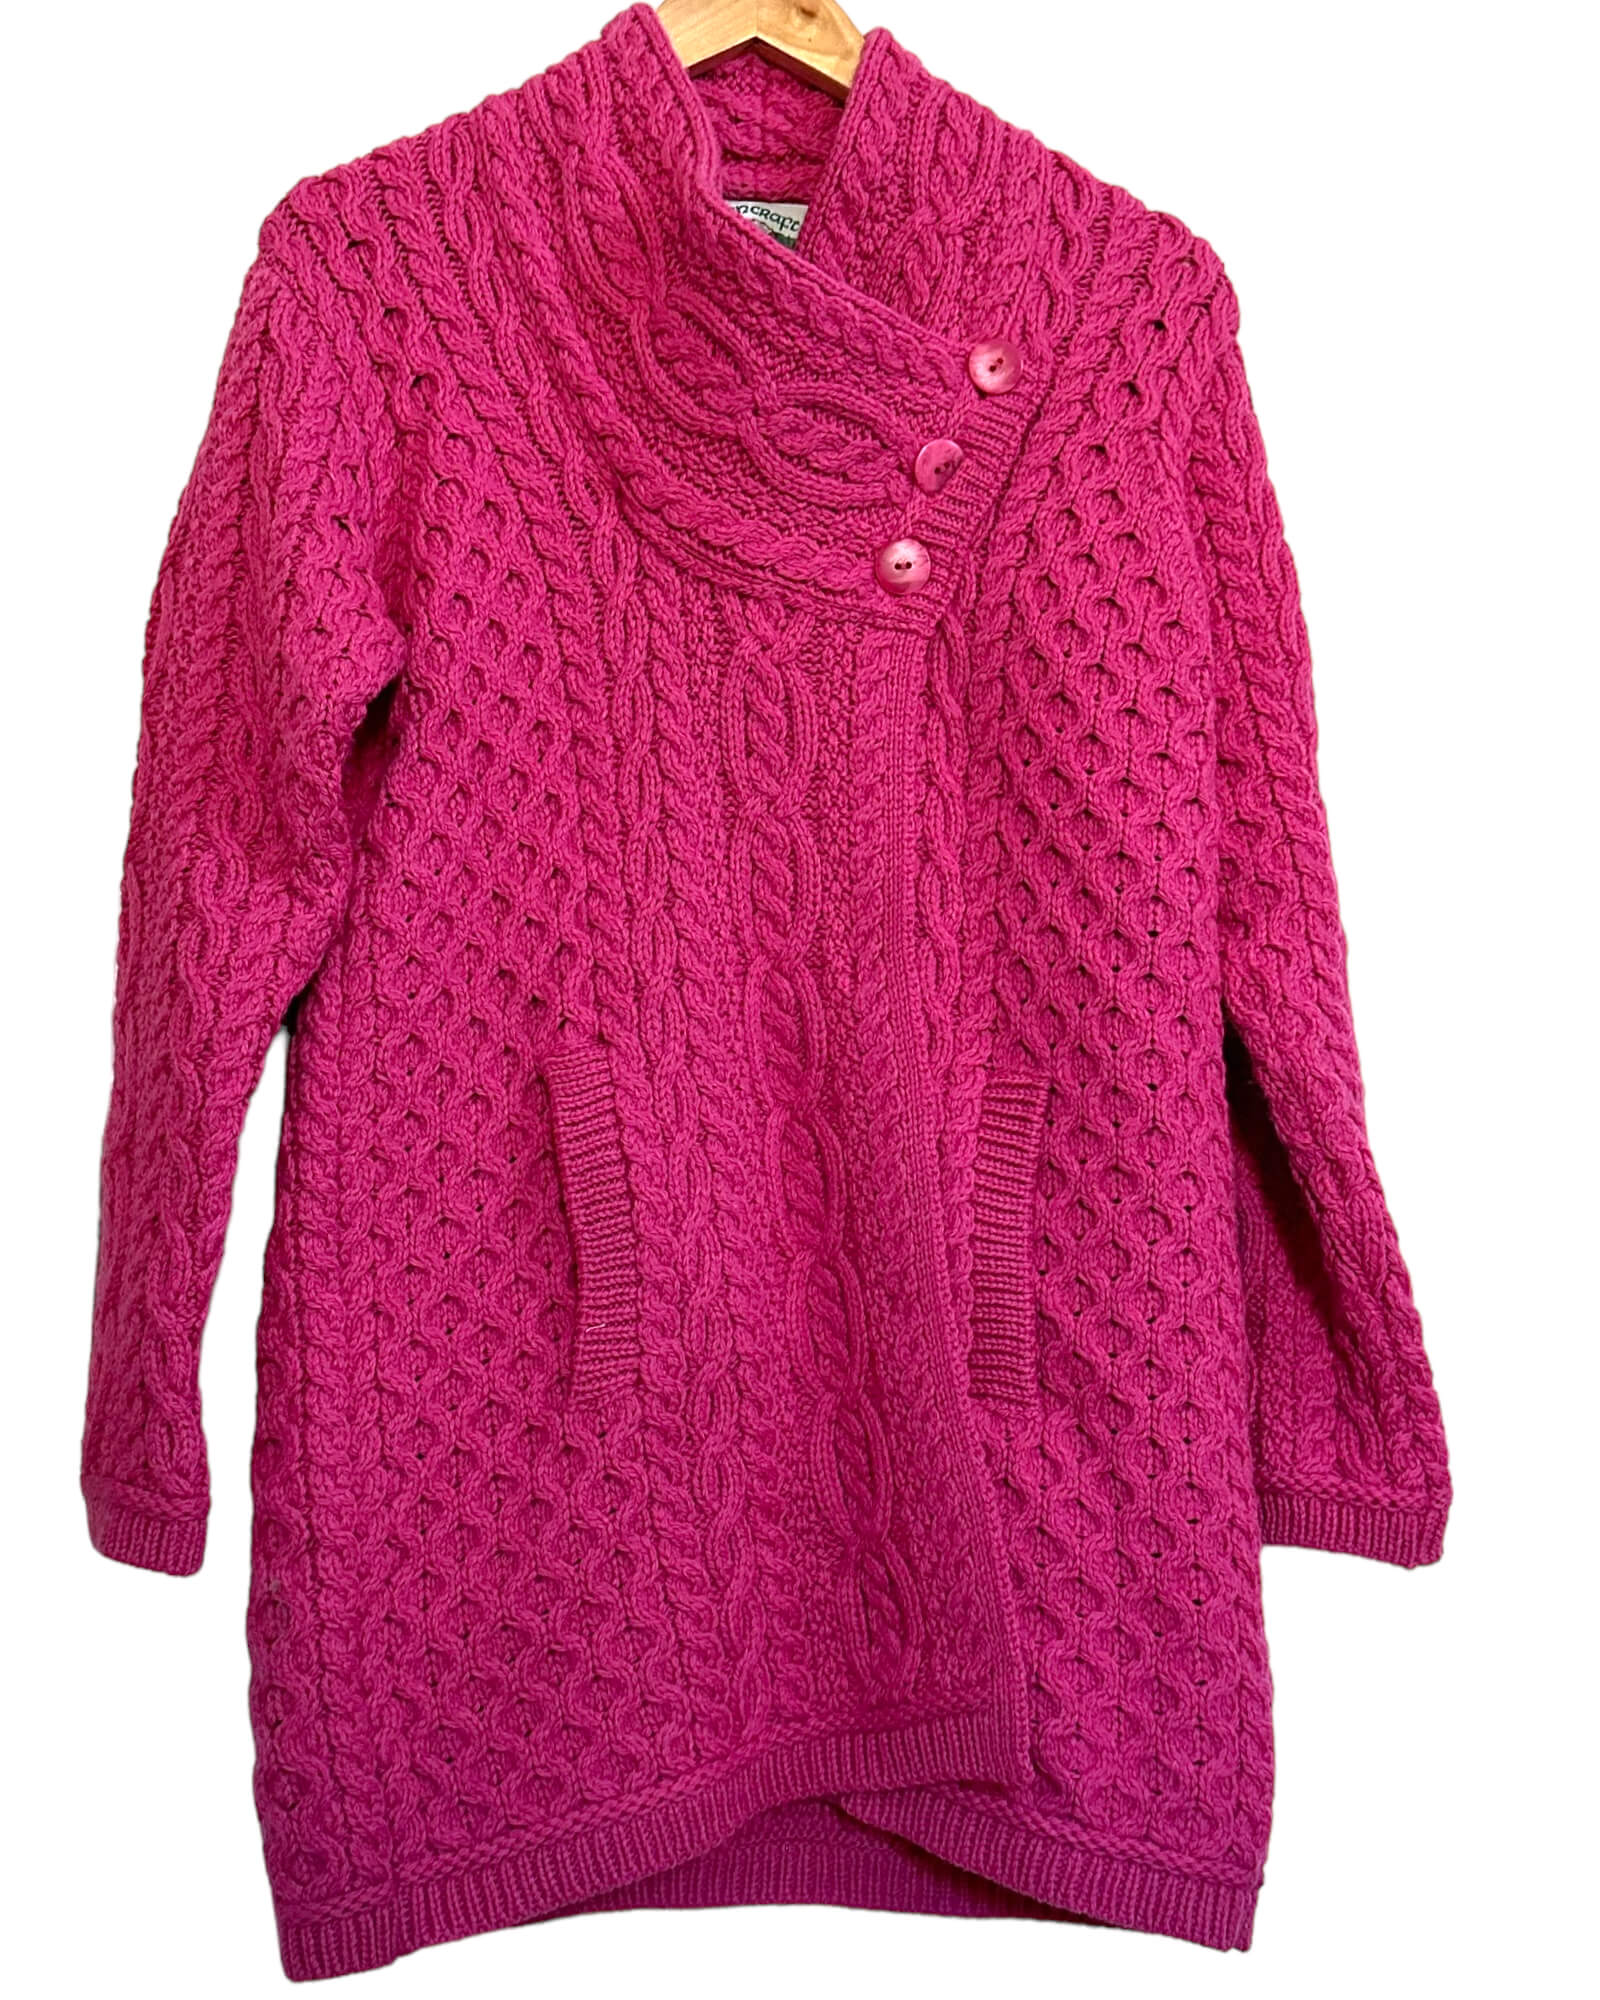 Cool Summer ARAN CRAFTS fuchsia pink cable knit sweater jacket